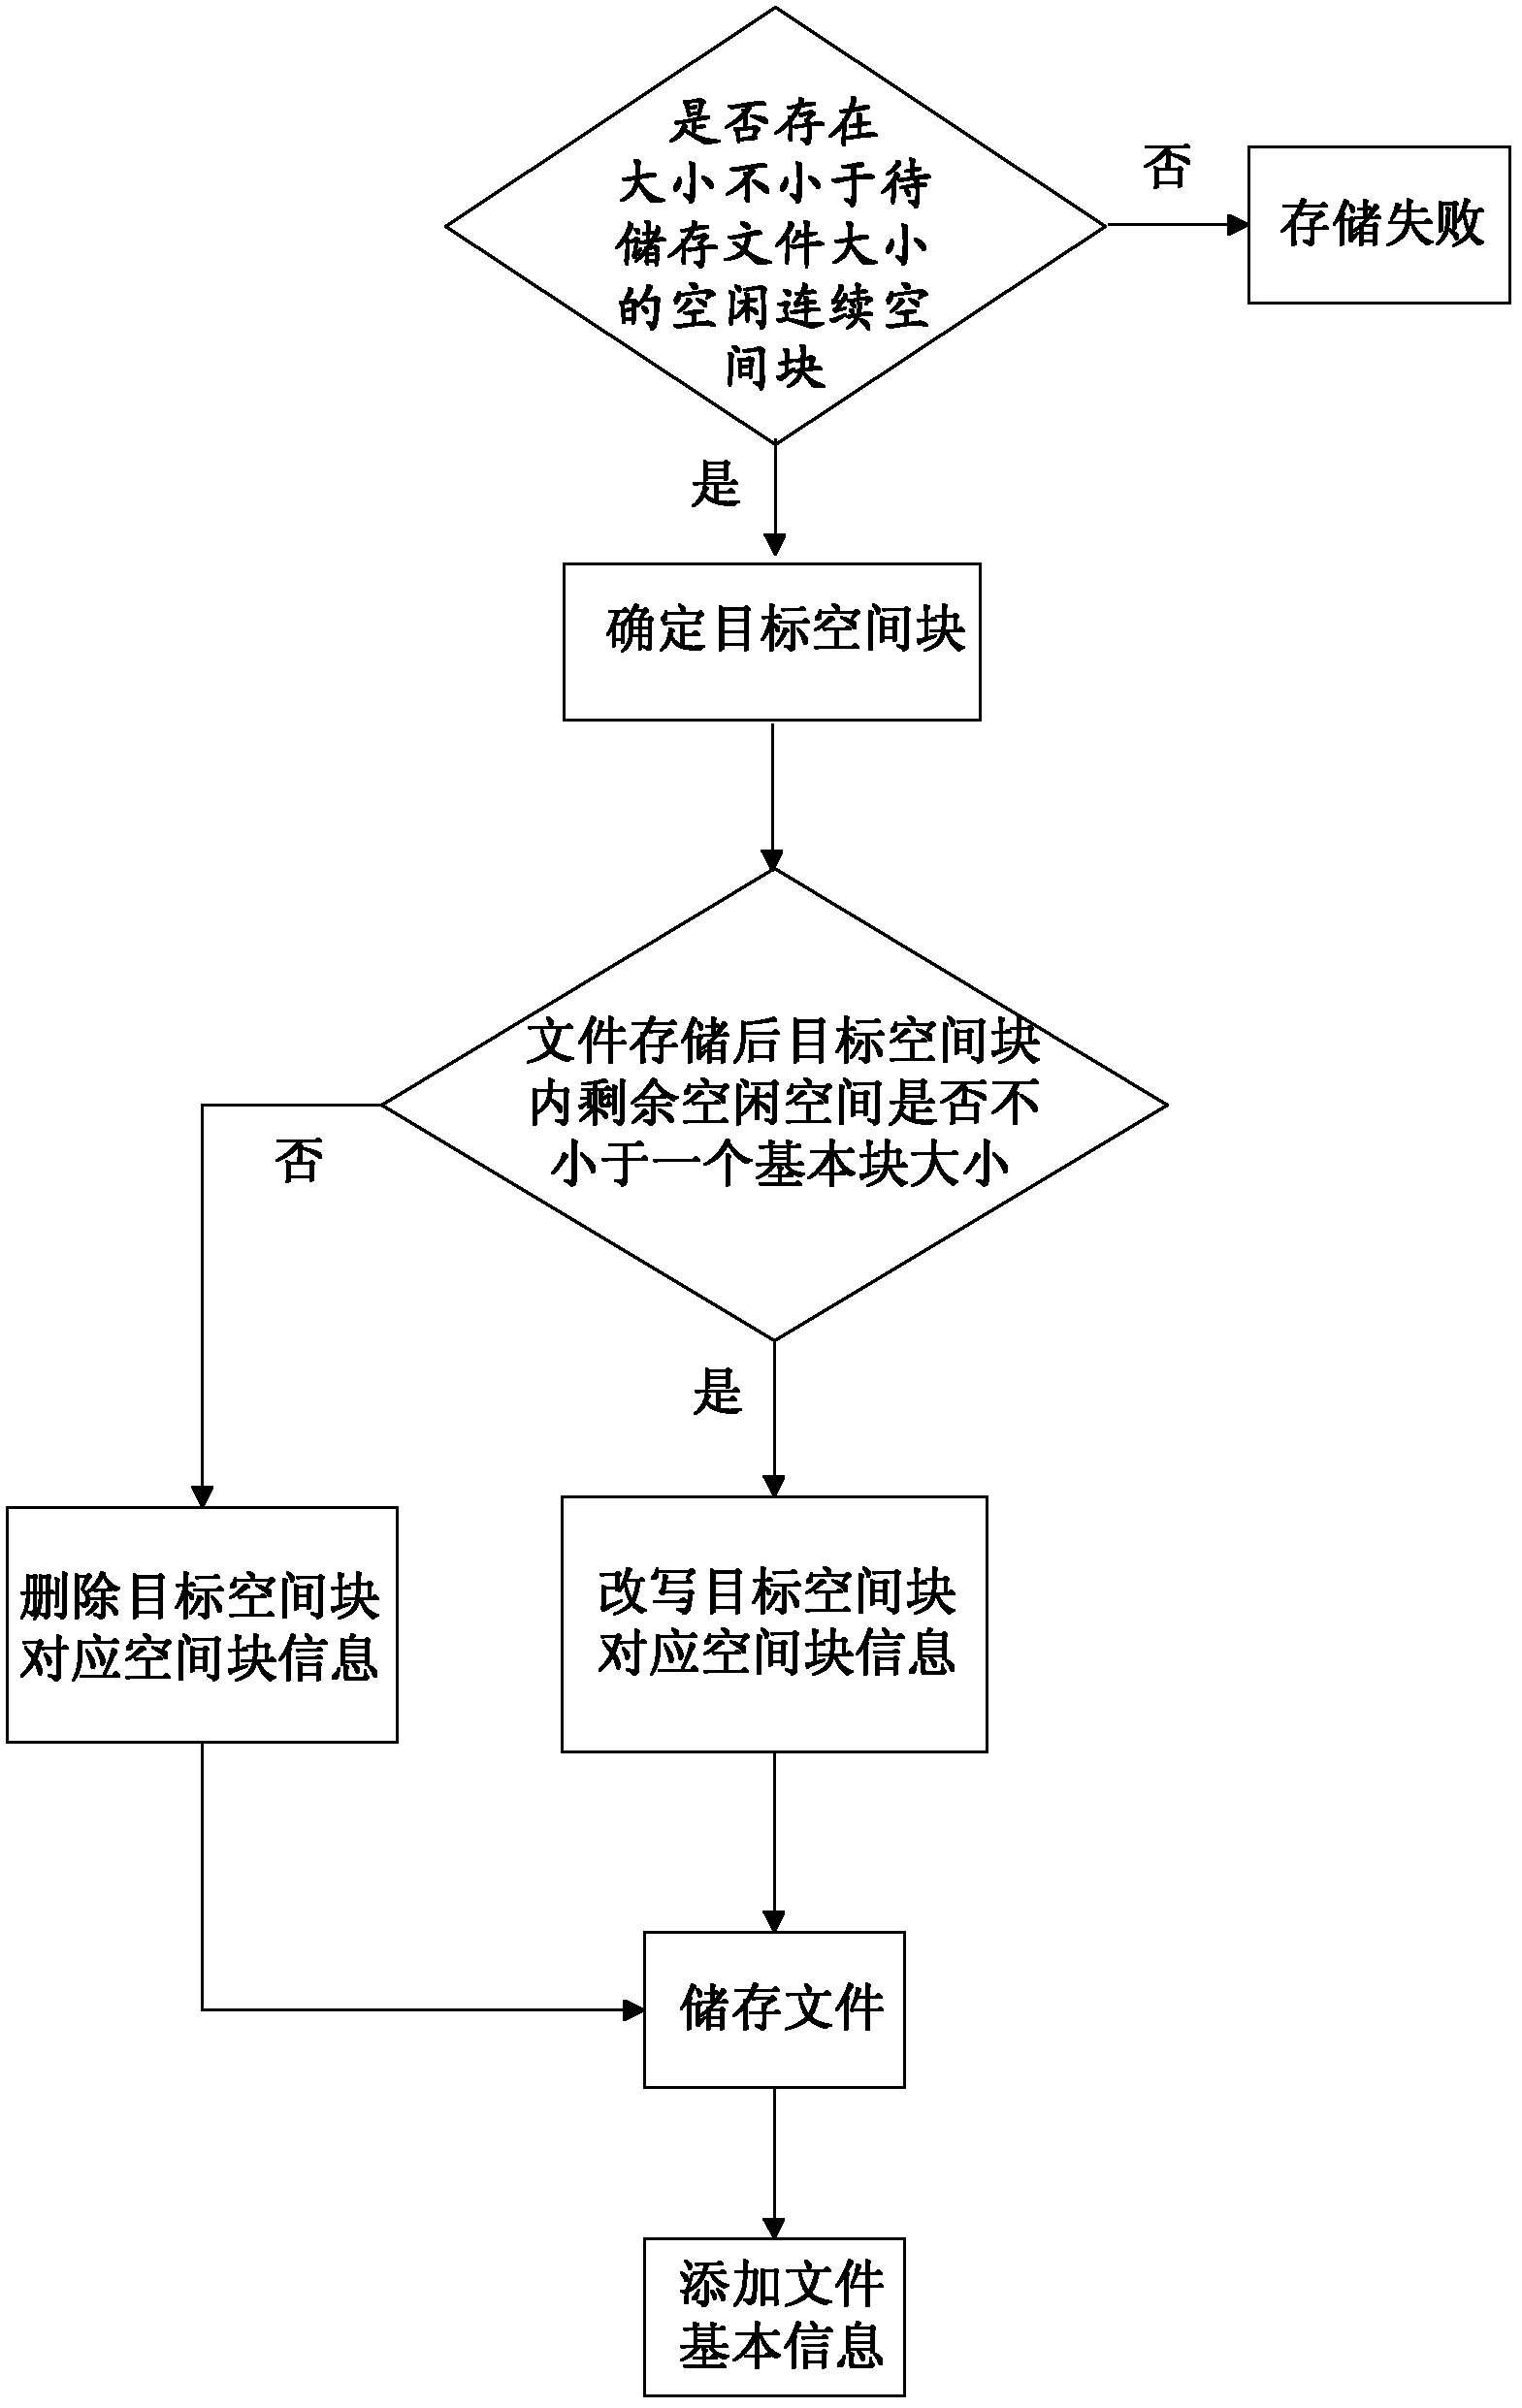 Multimedia data processing method and processing system suitable for digital media broadcast